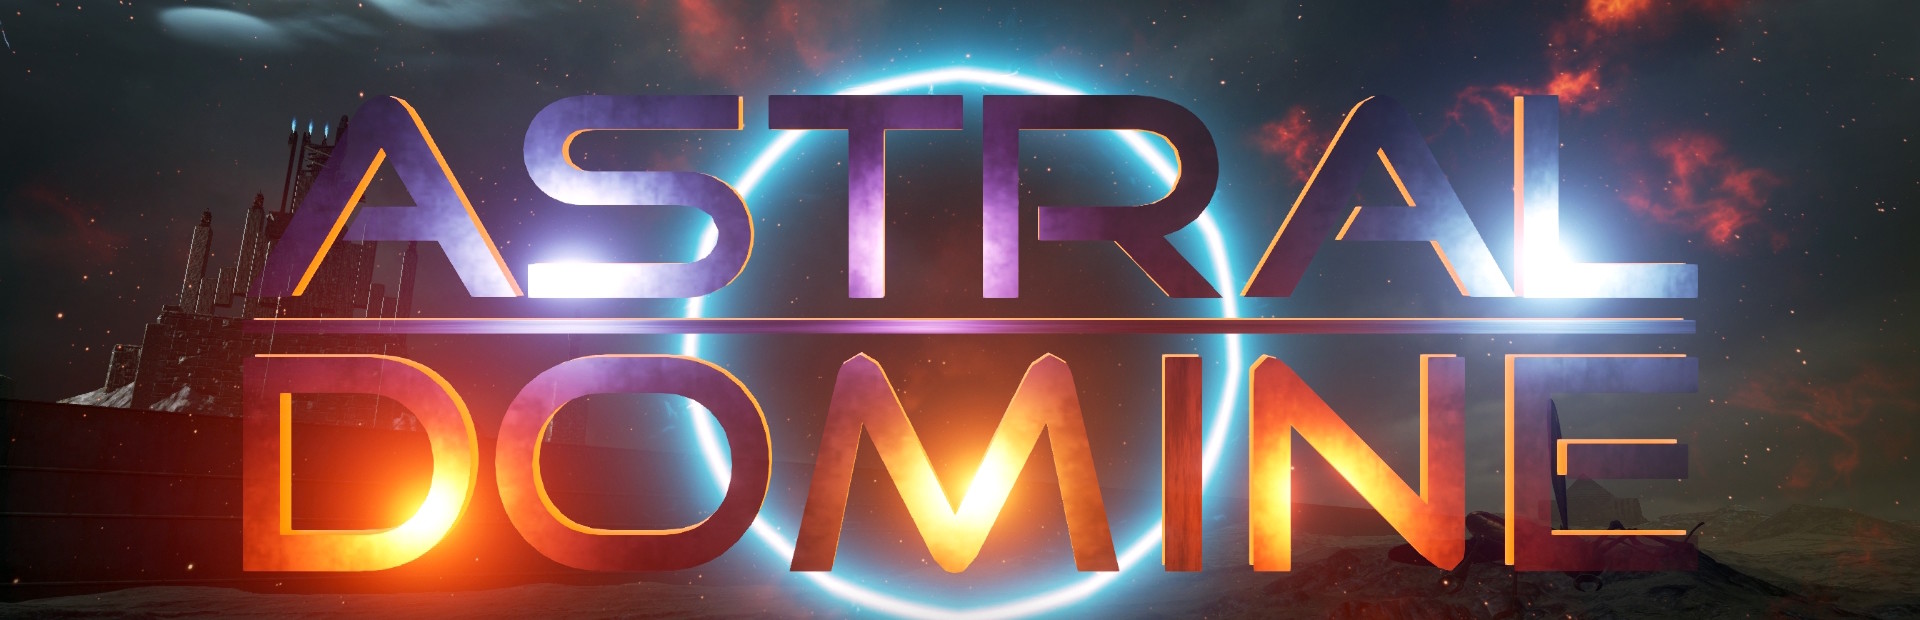 Astral Domine cover image